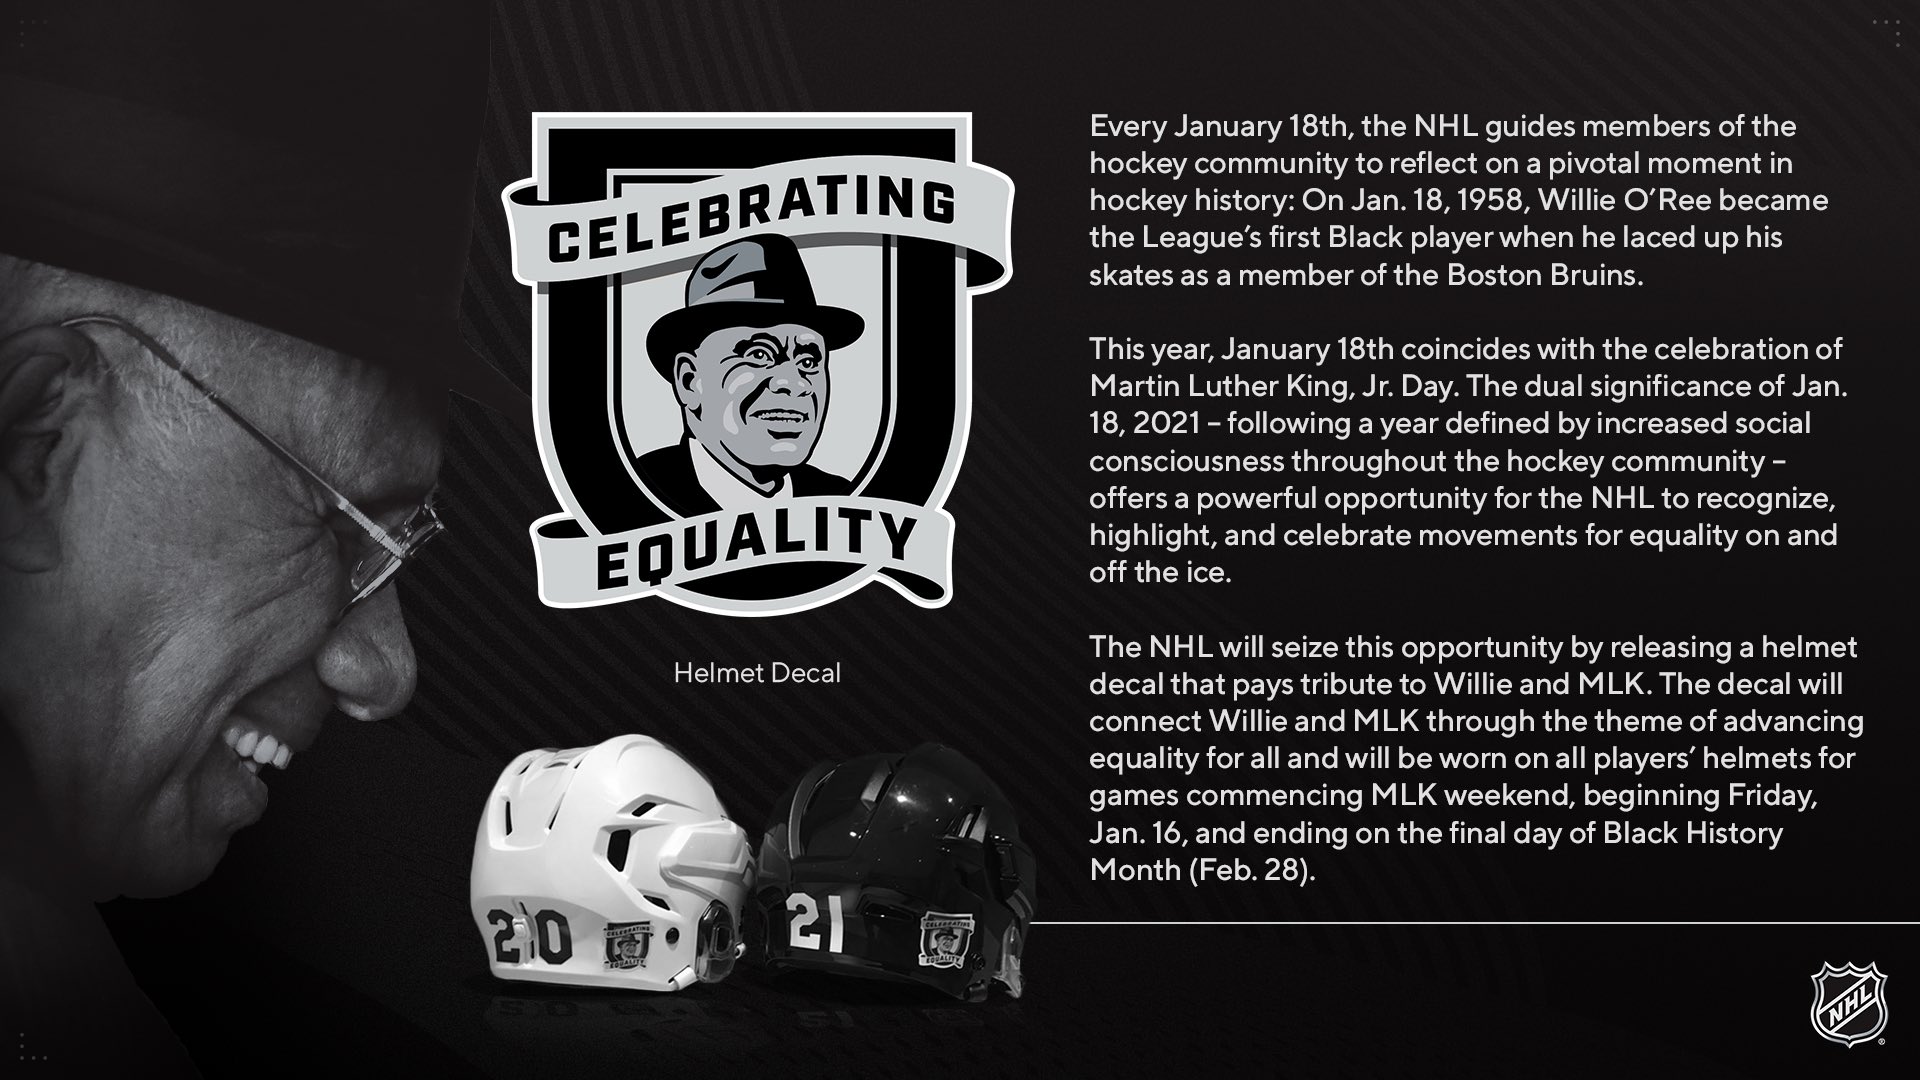 Willie O'Ree, 1st Black NHL player, reflects on his time in the